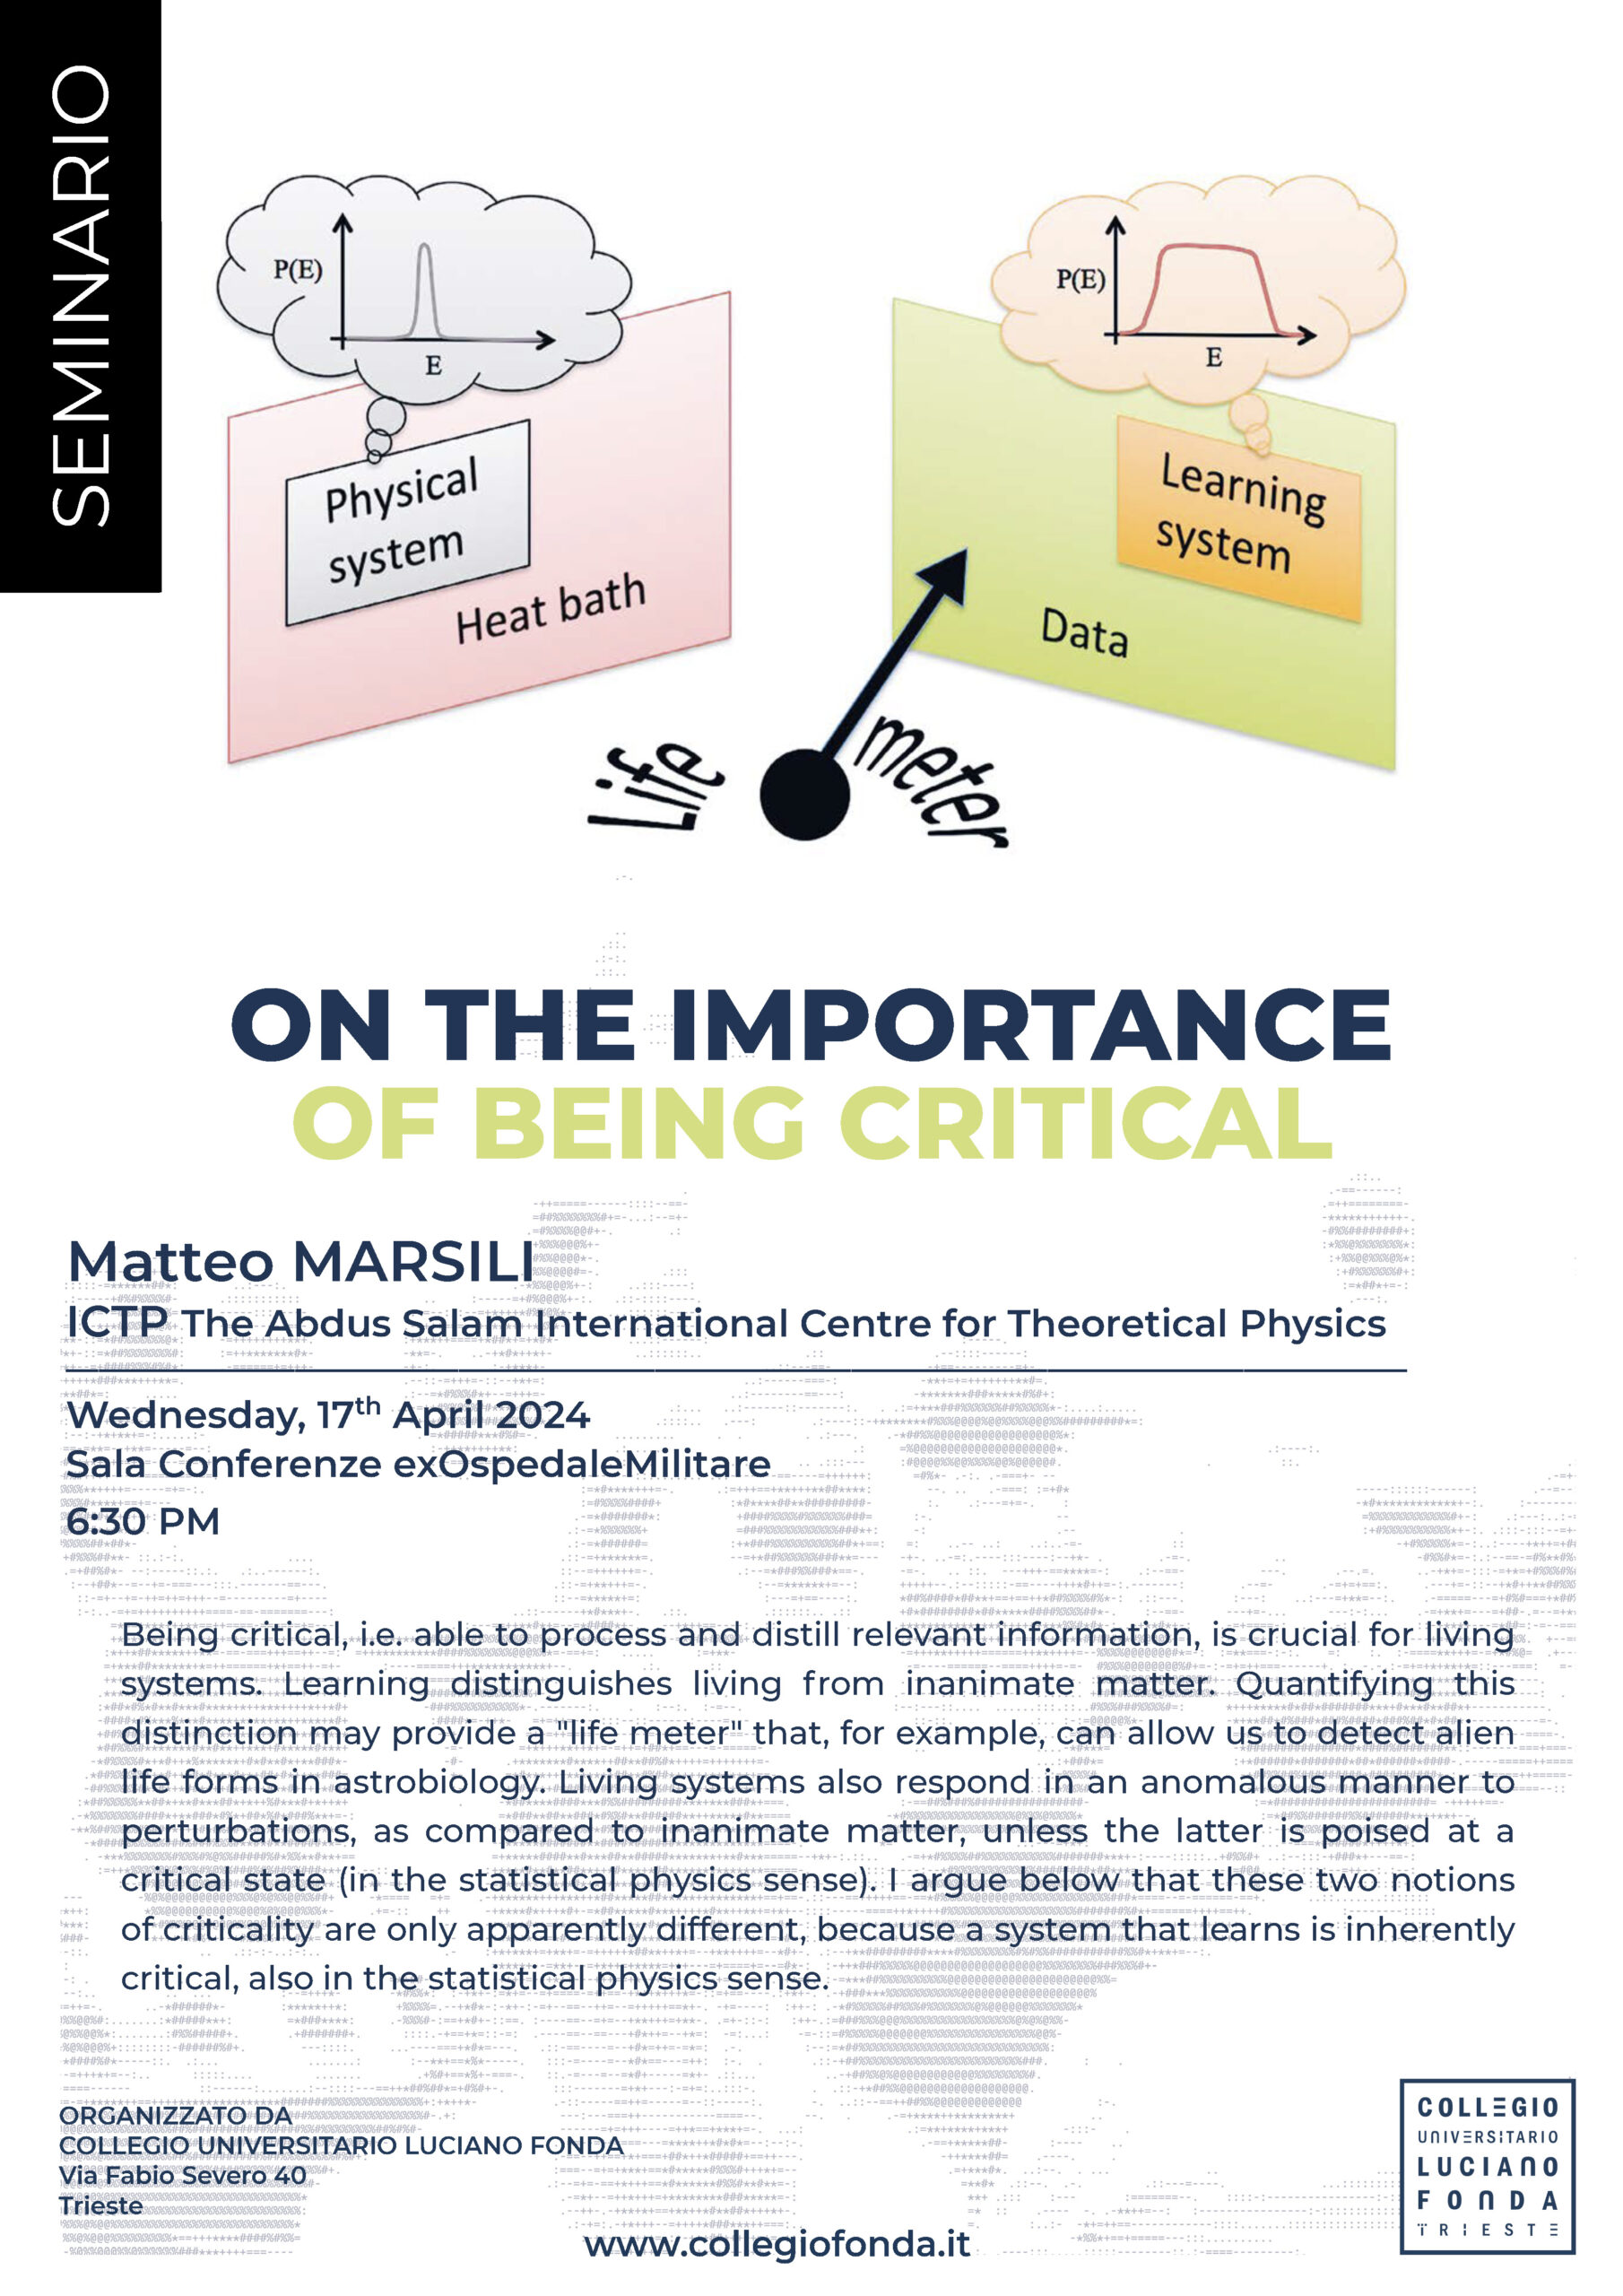 ON THE IMPORTANCE OF BEING CRITICAL • Seminar by Matteo Marsili – Wednesday, 17th April 2024